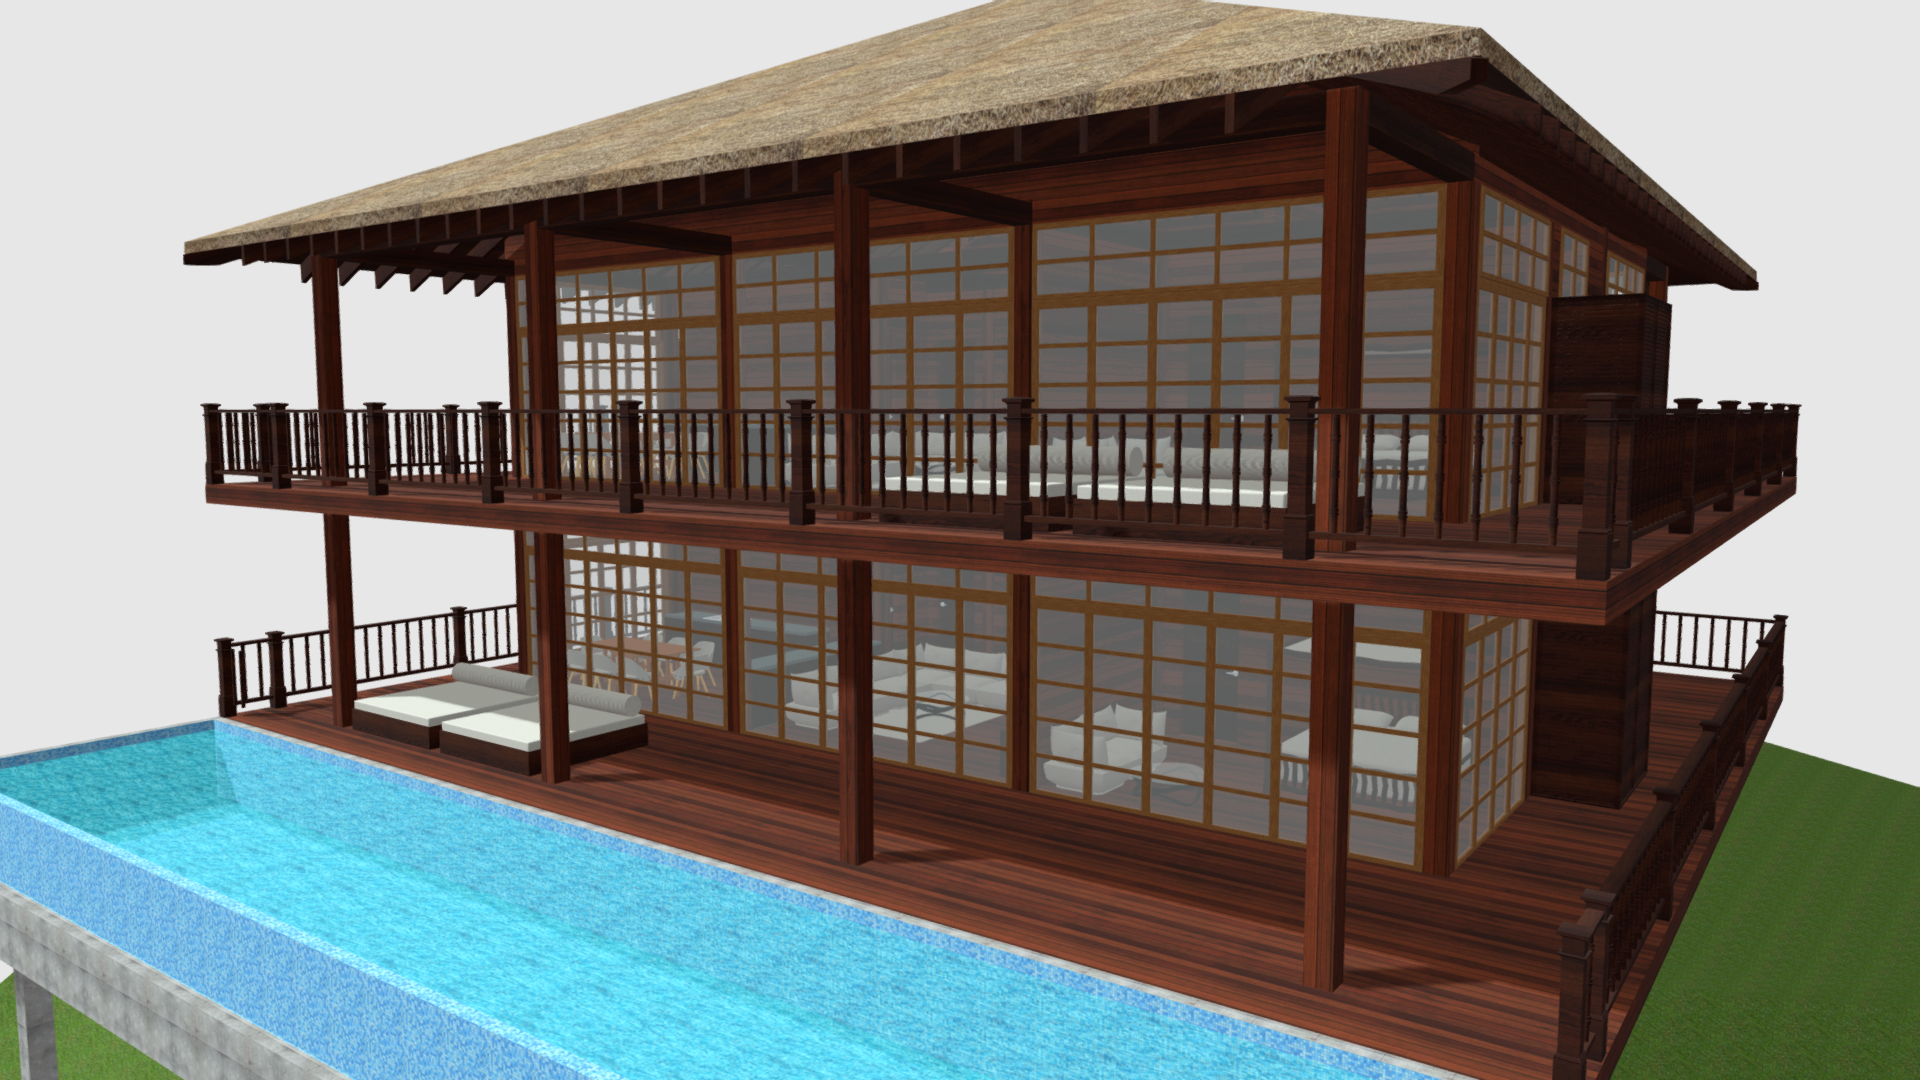 ARCHITECTURAL PROJECT BOUTIQUE HOTEL "LAGOON" 